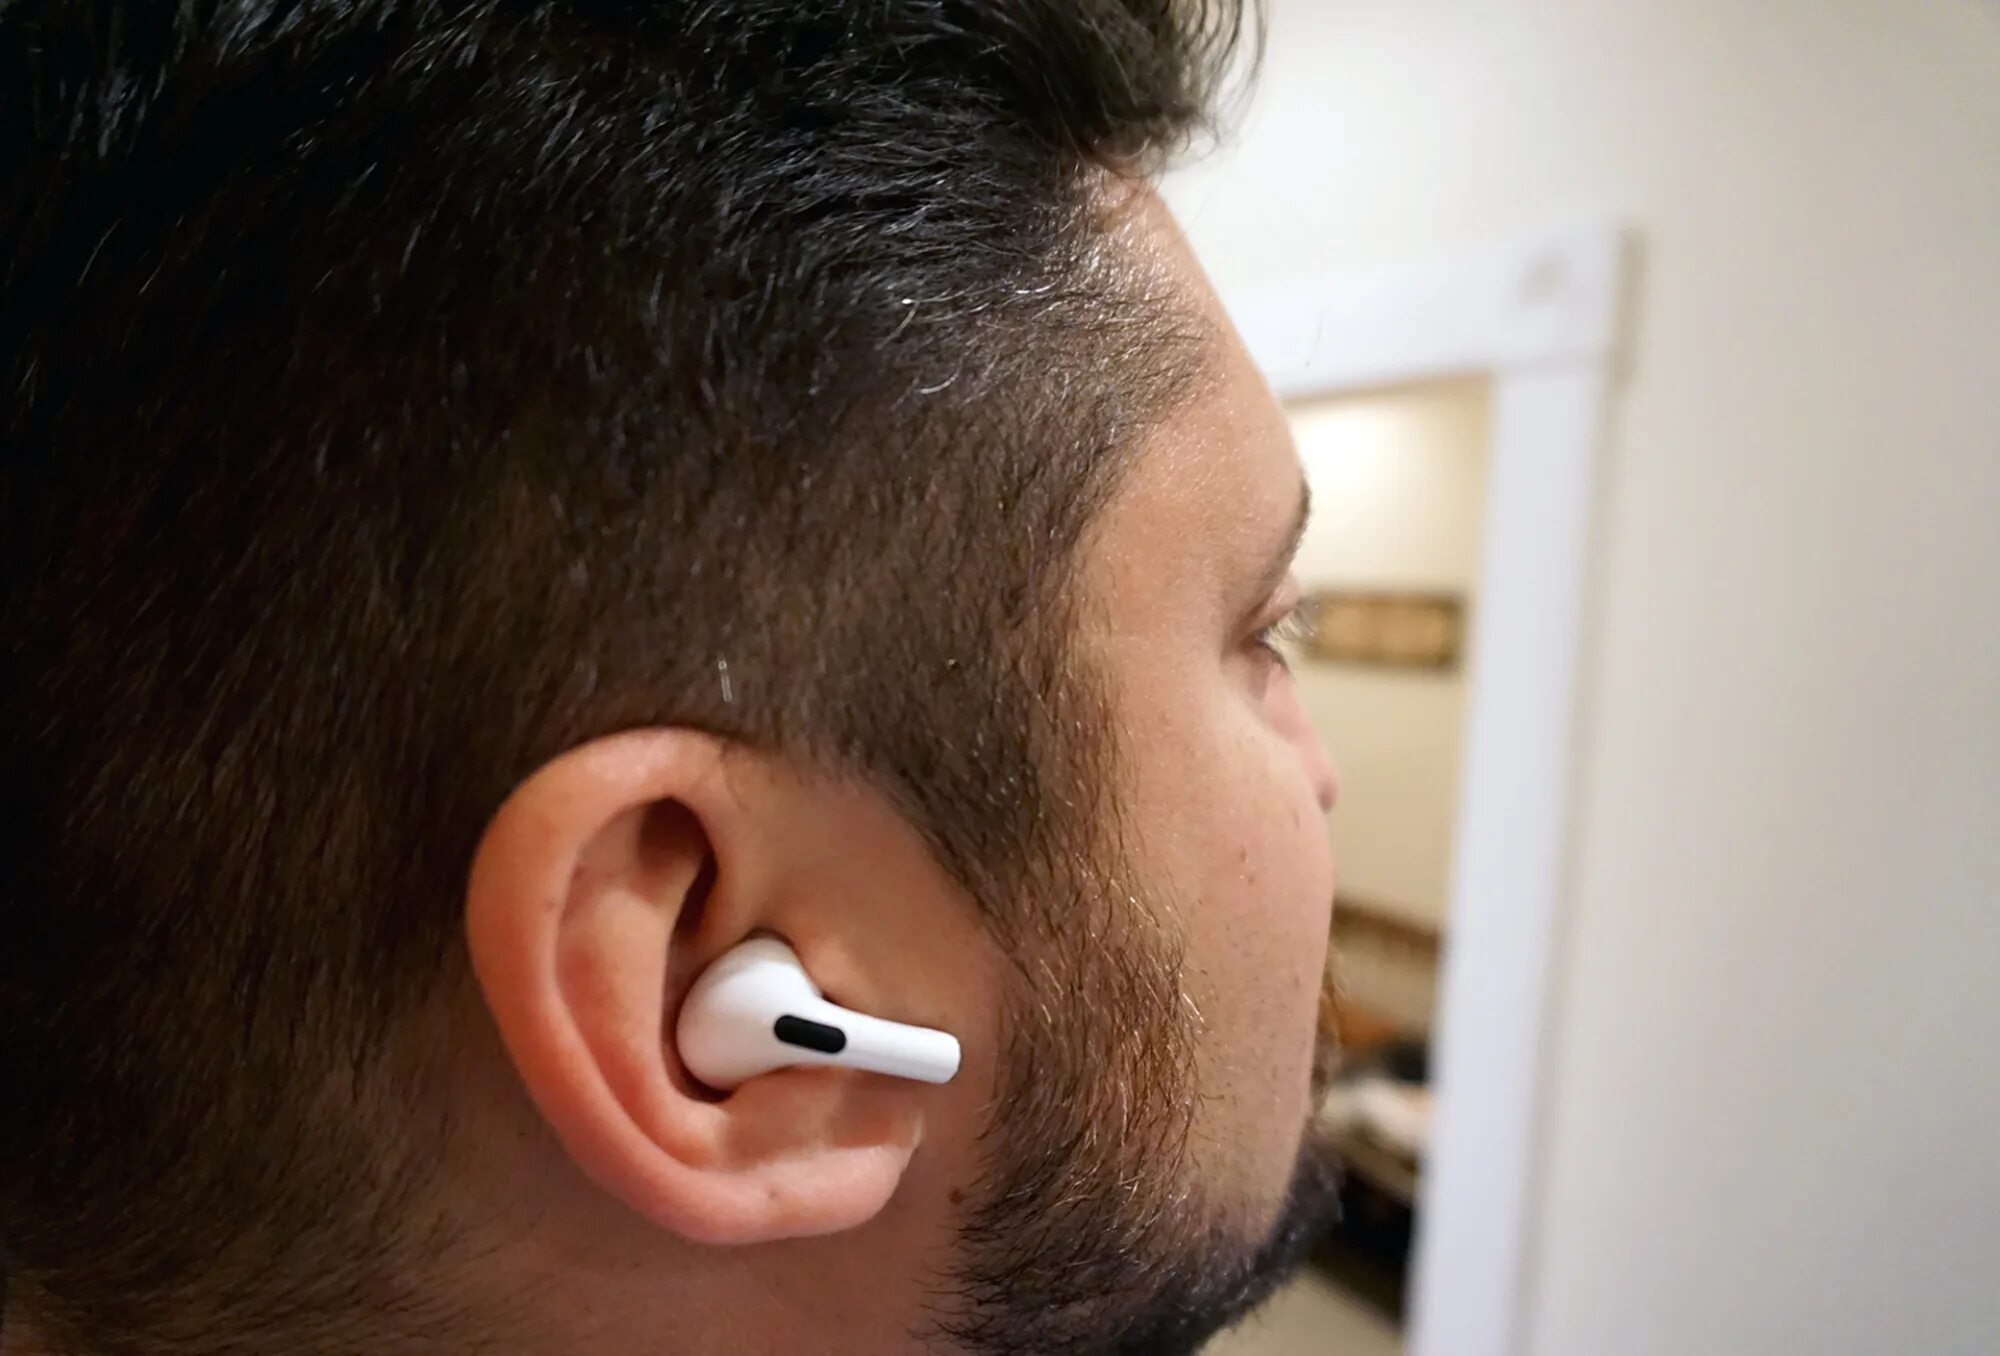 Как правильно airpods. AIRPODS 3 in Ear. Apple AIRPODS Pro 2 в ушах. Аирподс 2 в ухе. Apple AIRPODS Pro 3 в ухе.